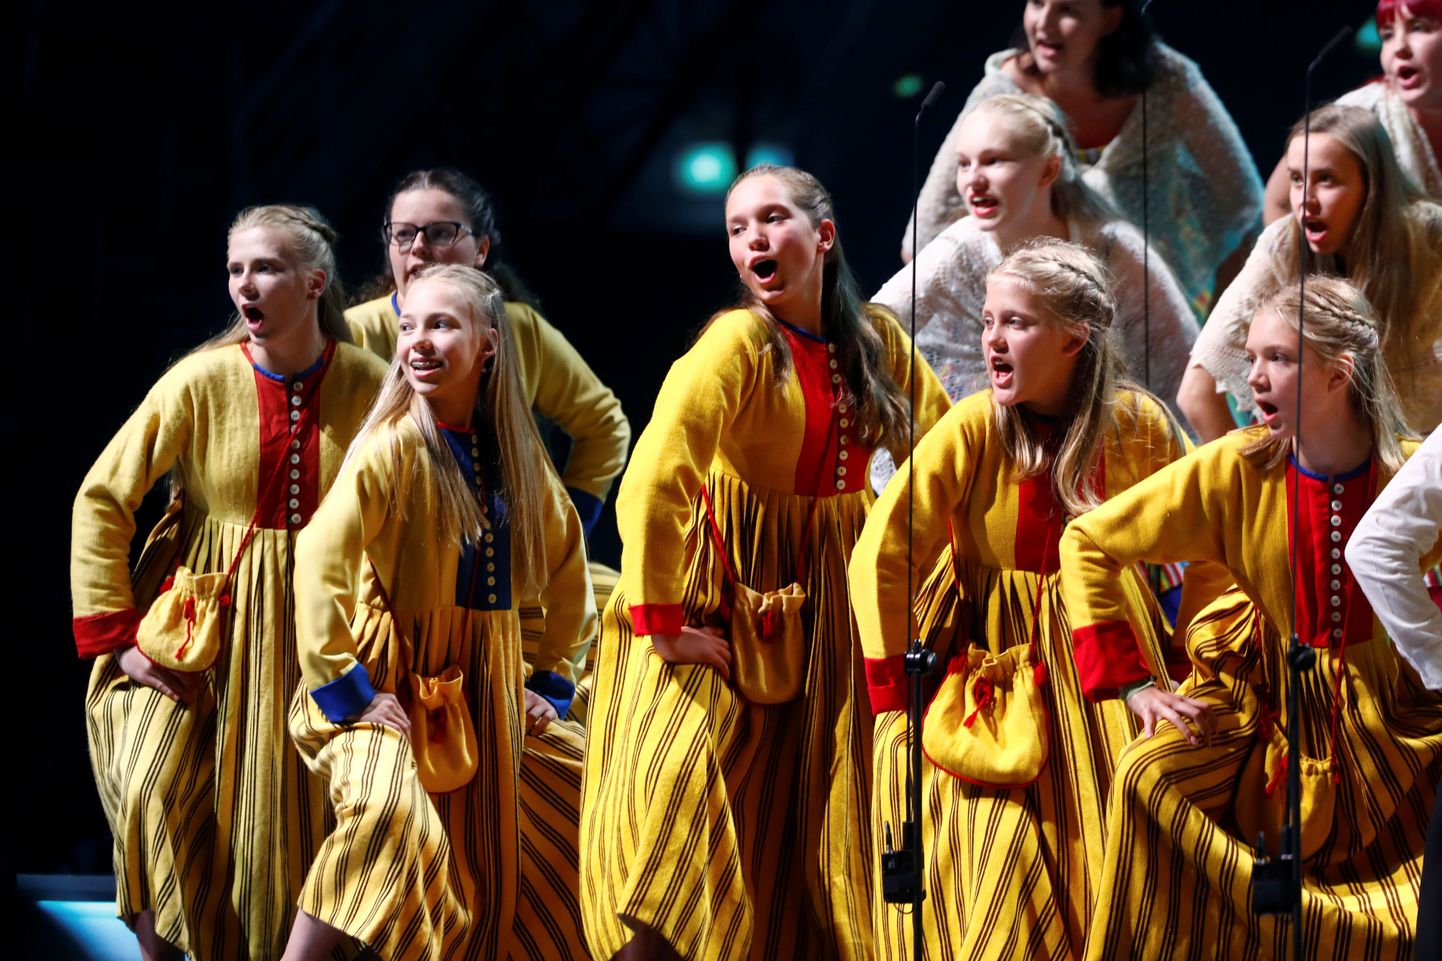 Estonian Television Girls' choir performs during a rehearsal of the Eurovision Choir of the Year contest in Riga, Latvia, July 21, 2017. REUTERS/Ints Kalnins